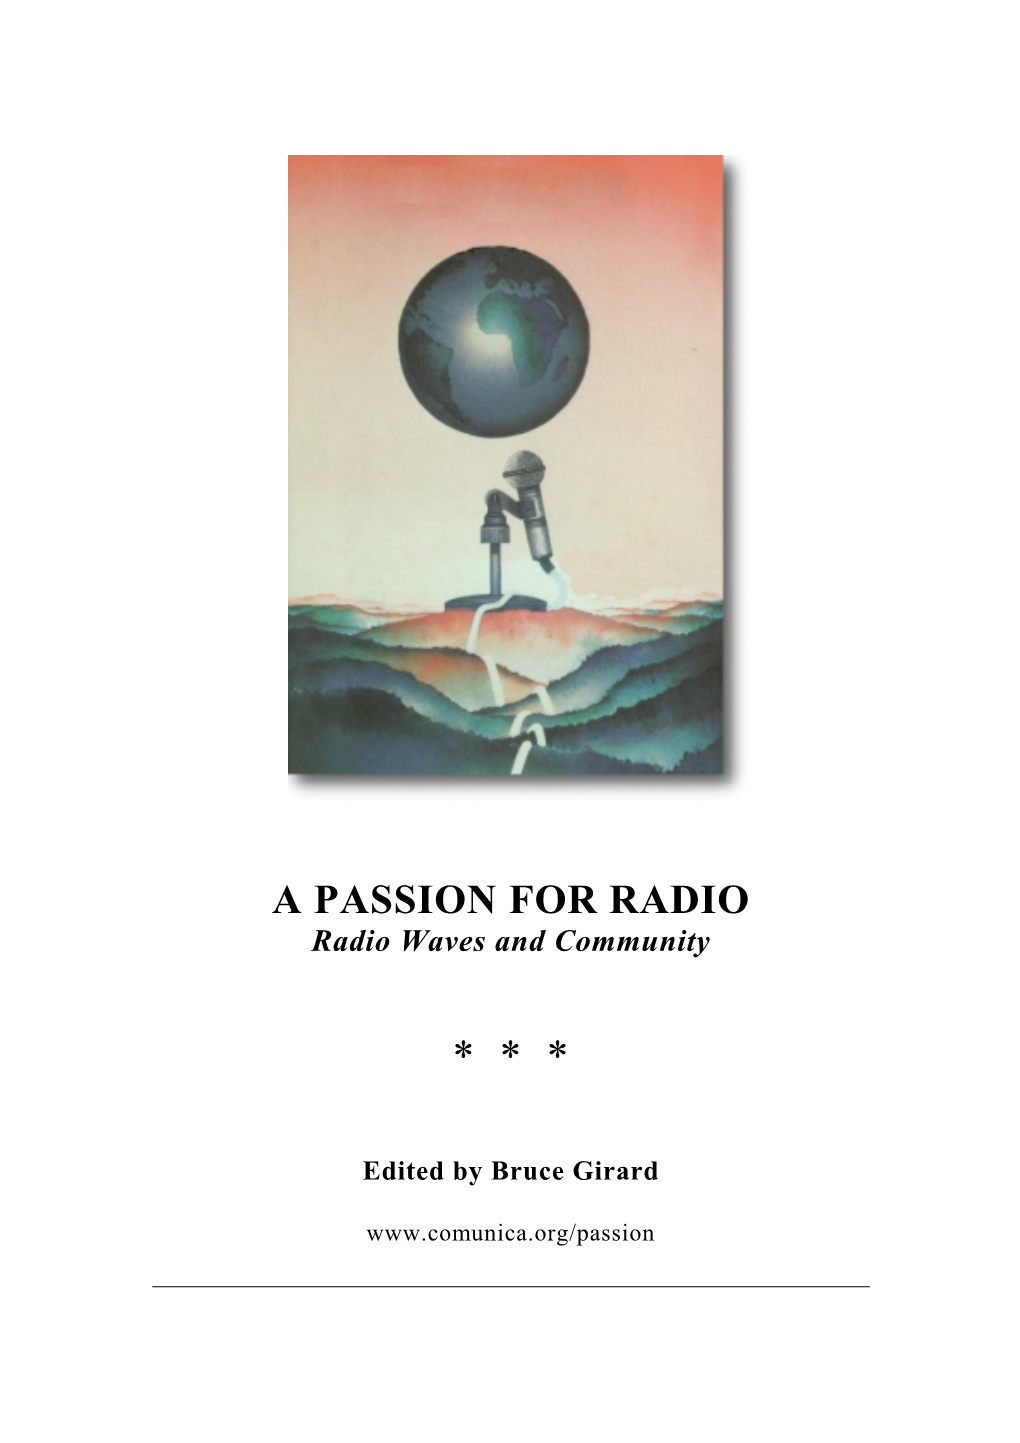 A PASSION for RADIO Radio Waves and Community